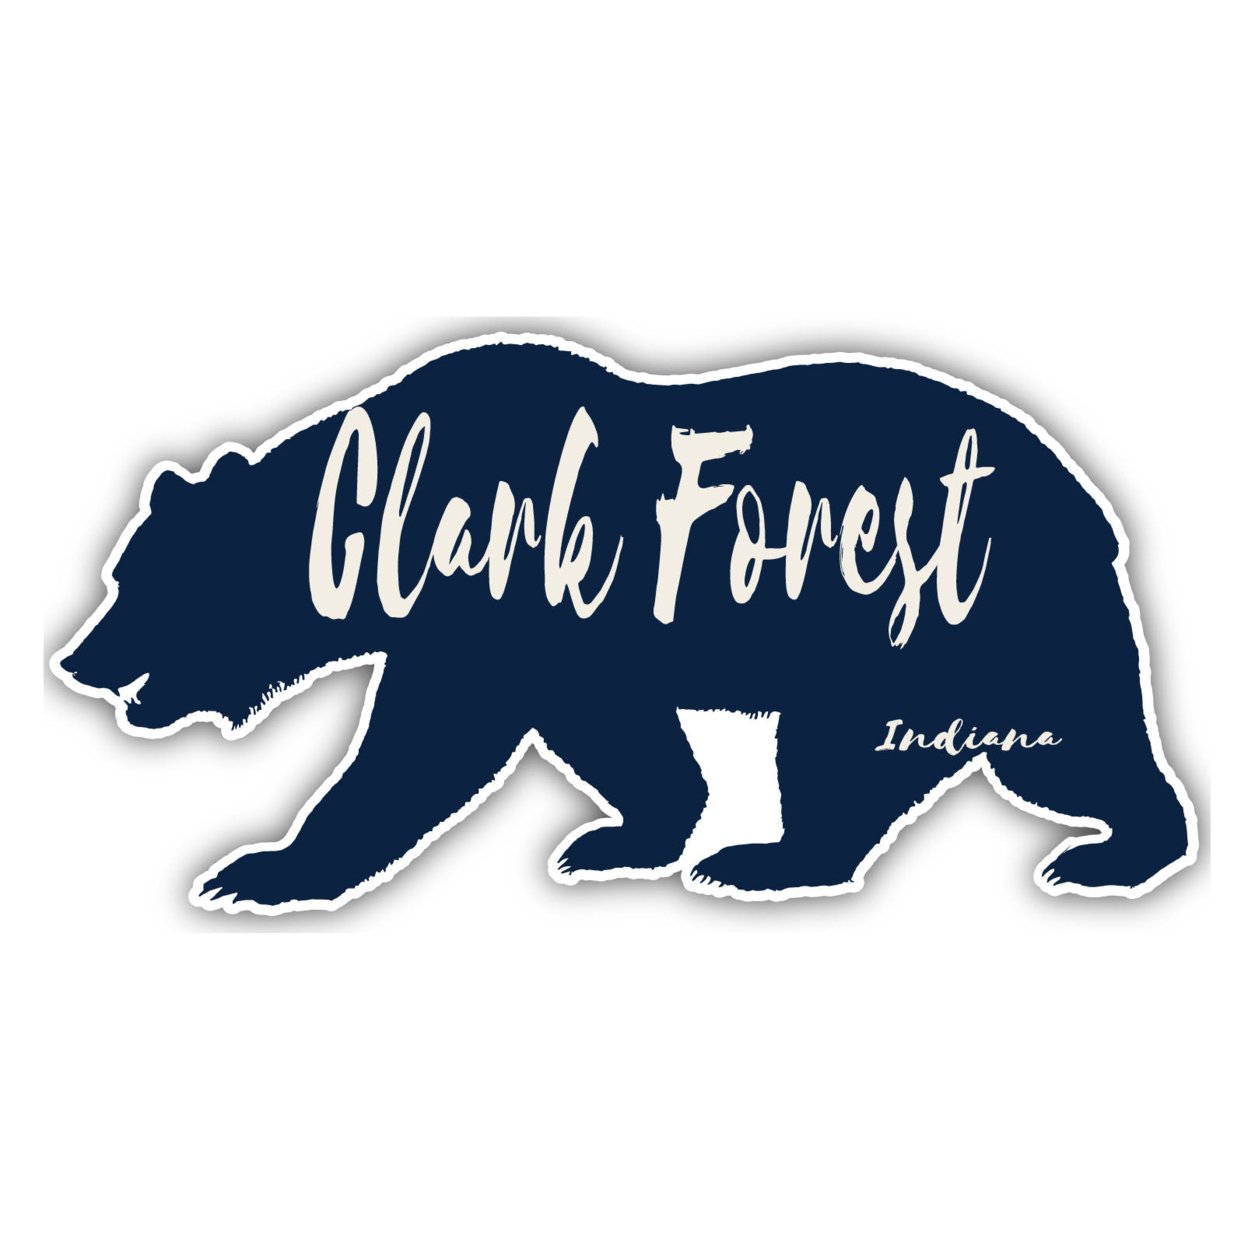 Clark Forest Indiana Souvenir Decorative Stickers (Choose Theme And Size) - Single Unit, 10-Inch, Bear